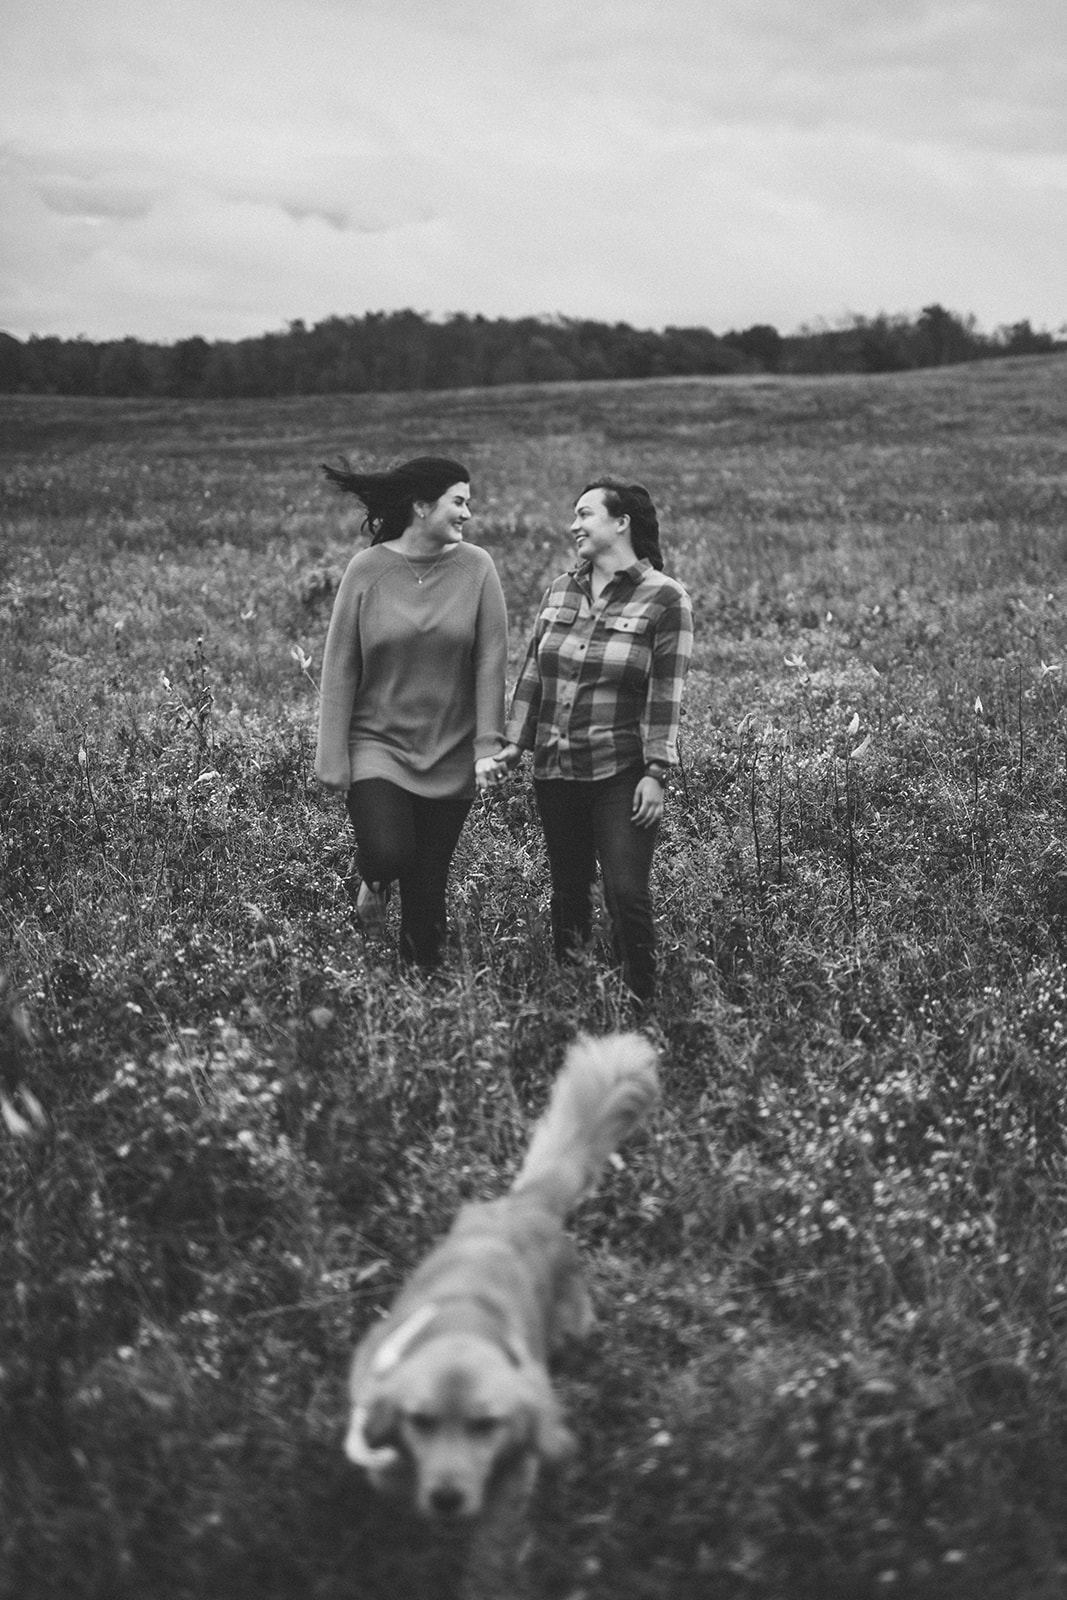 b&w photo of queer couple in a field with their dog running in front of them.